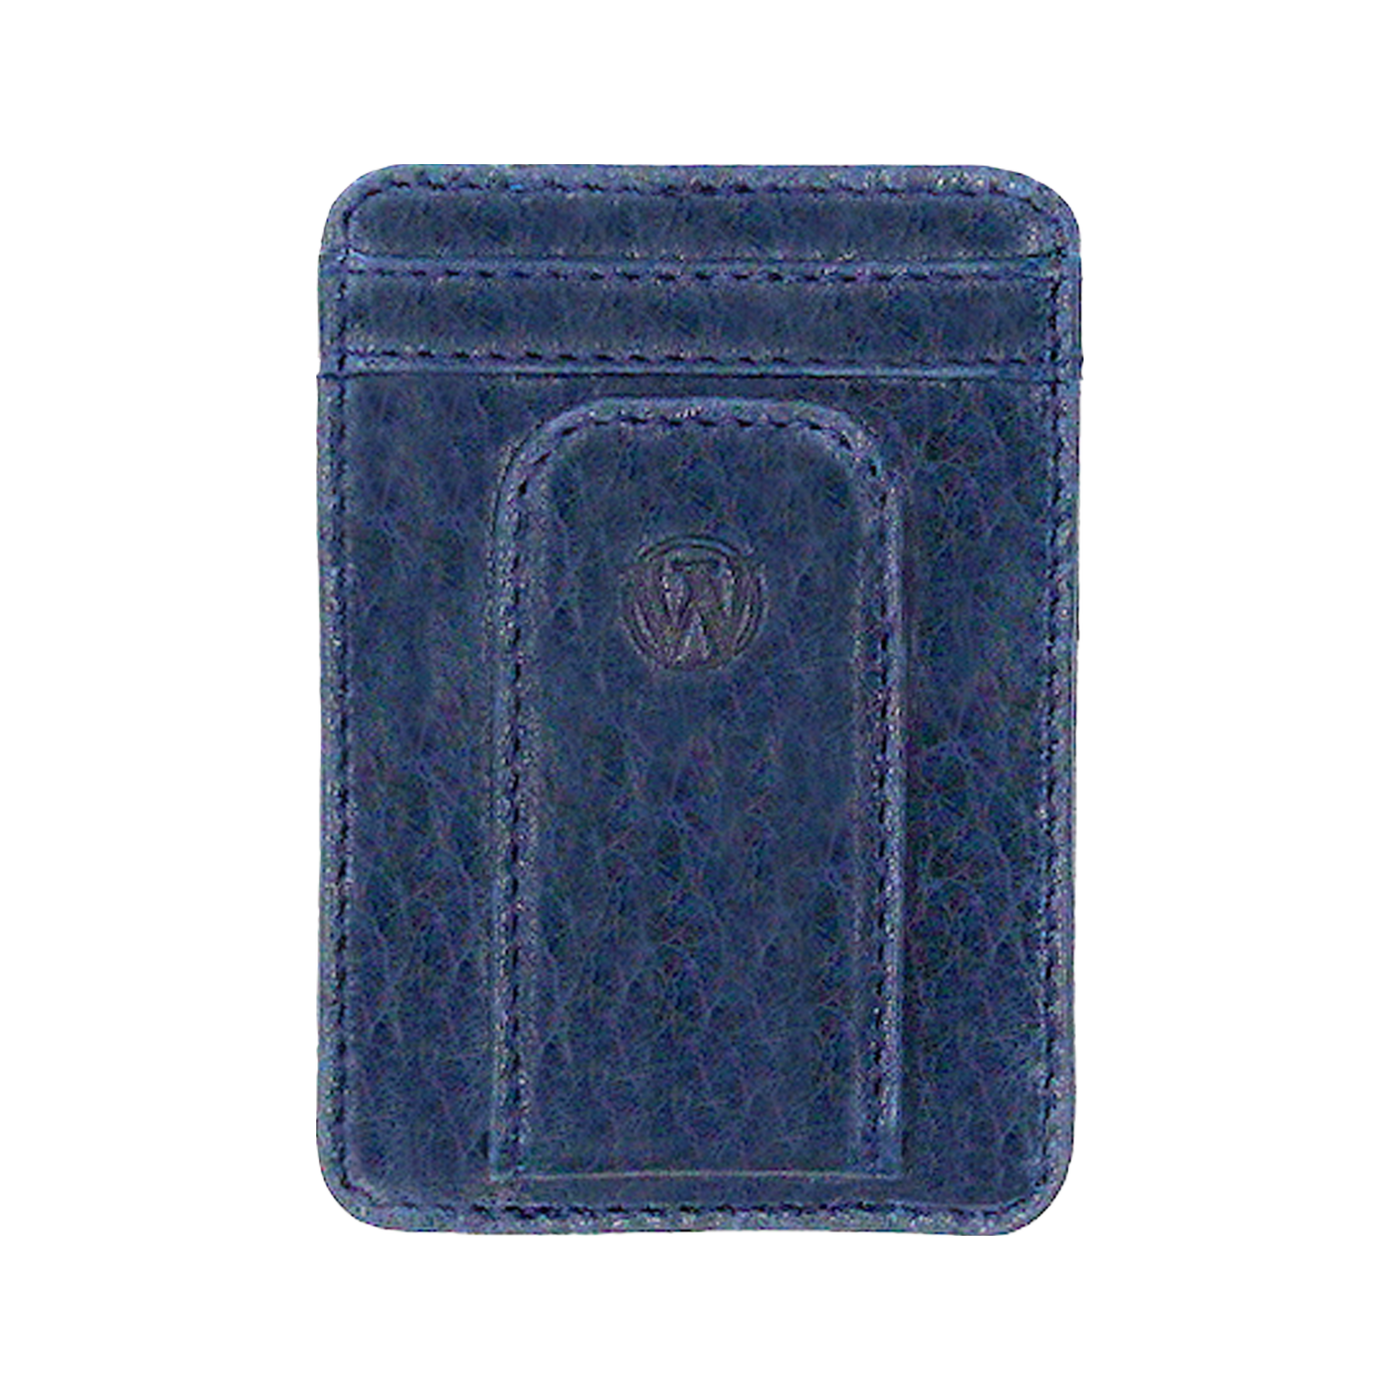 The Pursuit Front Pocket Marlin Money Clip provides the minimalist basic storage with this premier full grain leather and bold hand-dyed colored wallet. The stylish debossed marlin logo provides a personalized touch, making it perfect for any angler. Ensure to get your today! 2 Card Slots Strong Magnetic Closure Ultra Slim Minimalist & Modern Design Magnetic Clip Holds 10+ Bills Dimensions: 4"L x 2.8"H RFID Protection Color: Ocean